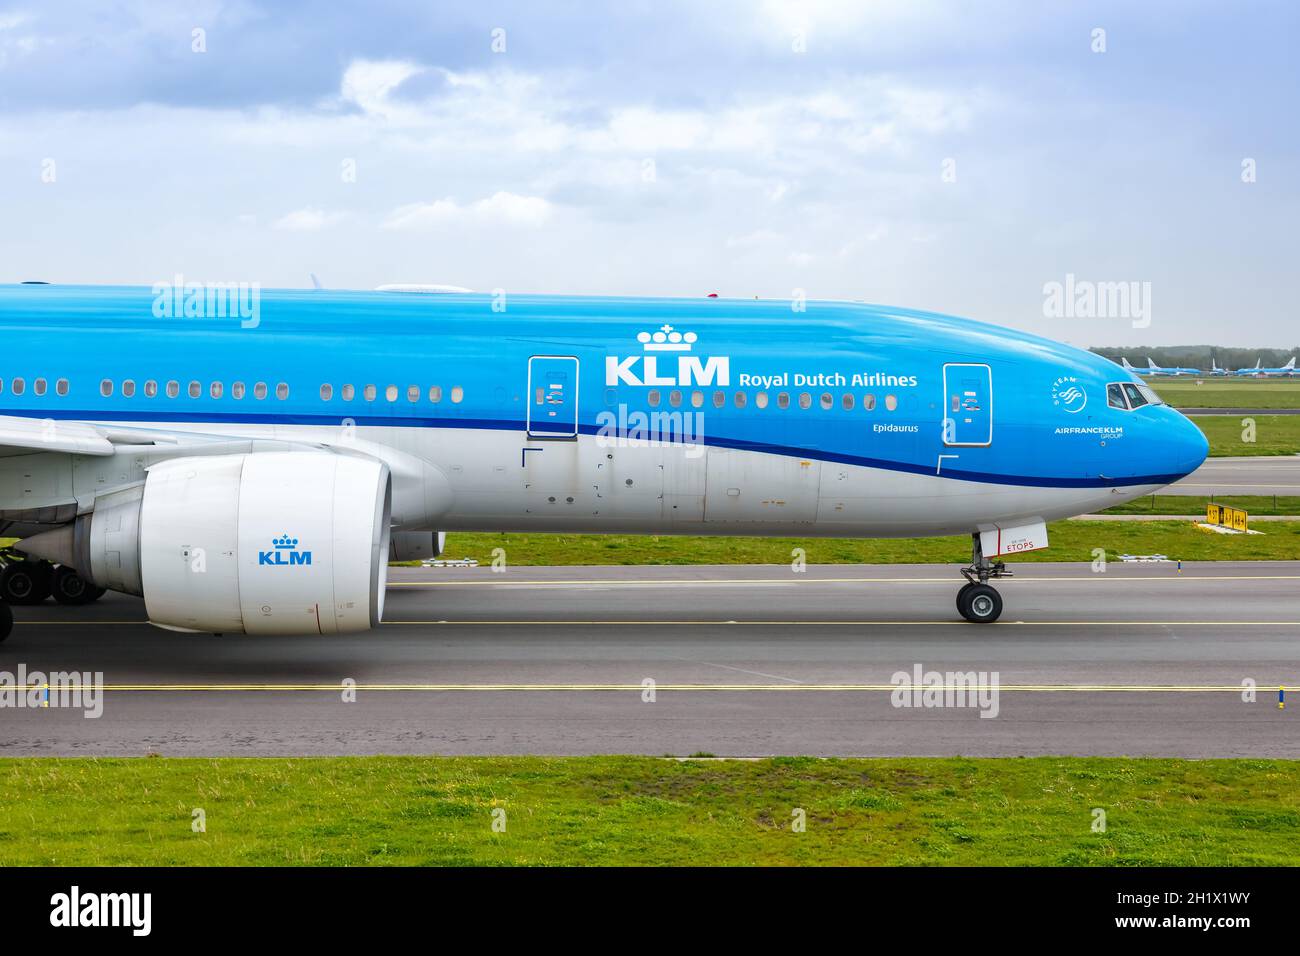 Amsterdam, Netherlands - May 21, 2021: KLM Royal Dutch Airlines Boeing 777-200ER airplane at Amsterdam Schiphol airport (AMS) in the Netherlands. Stock Photo